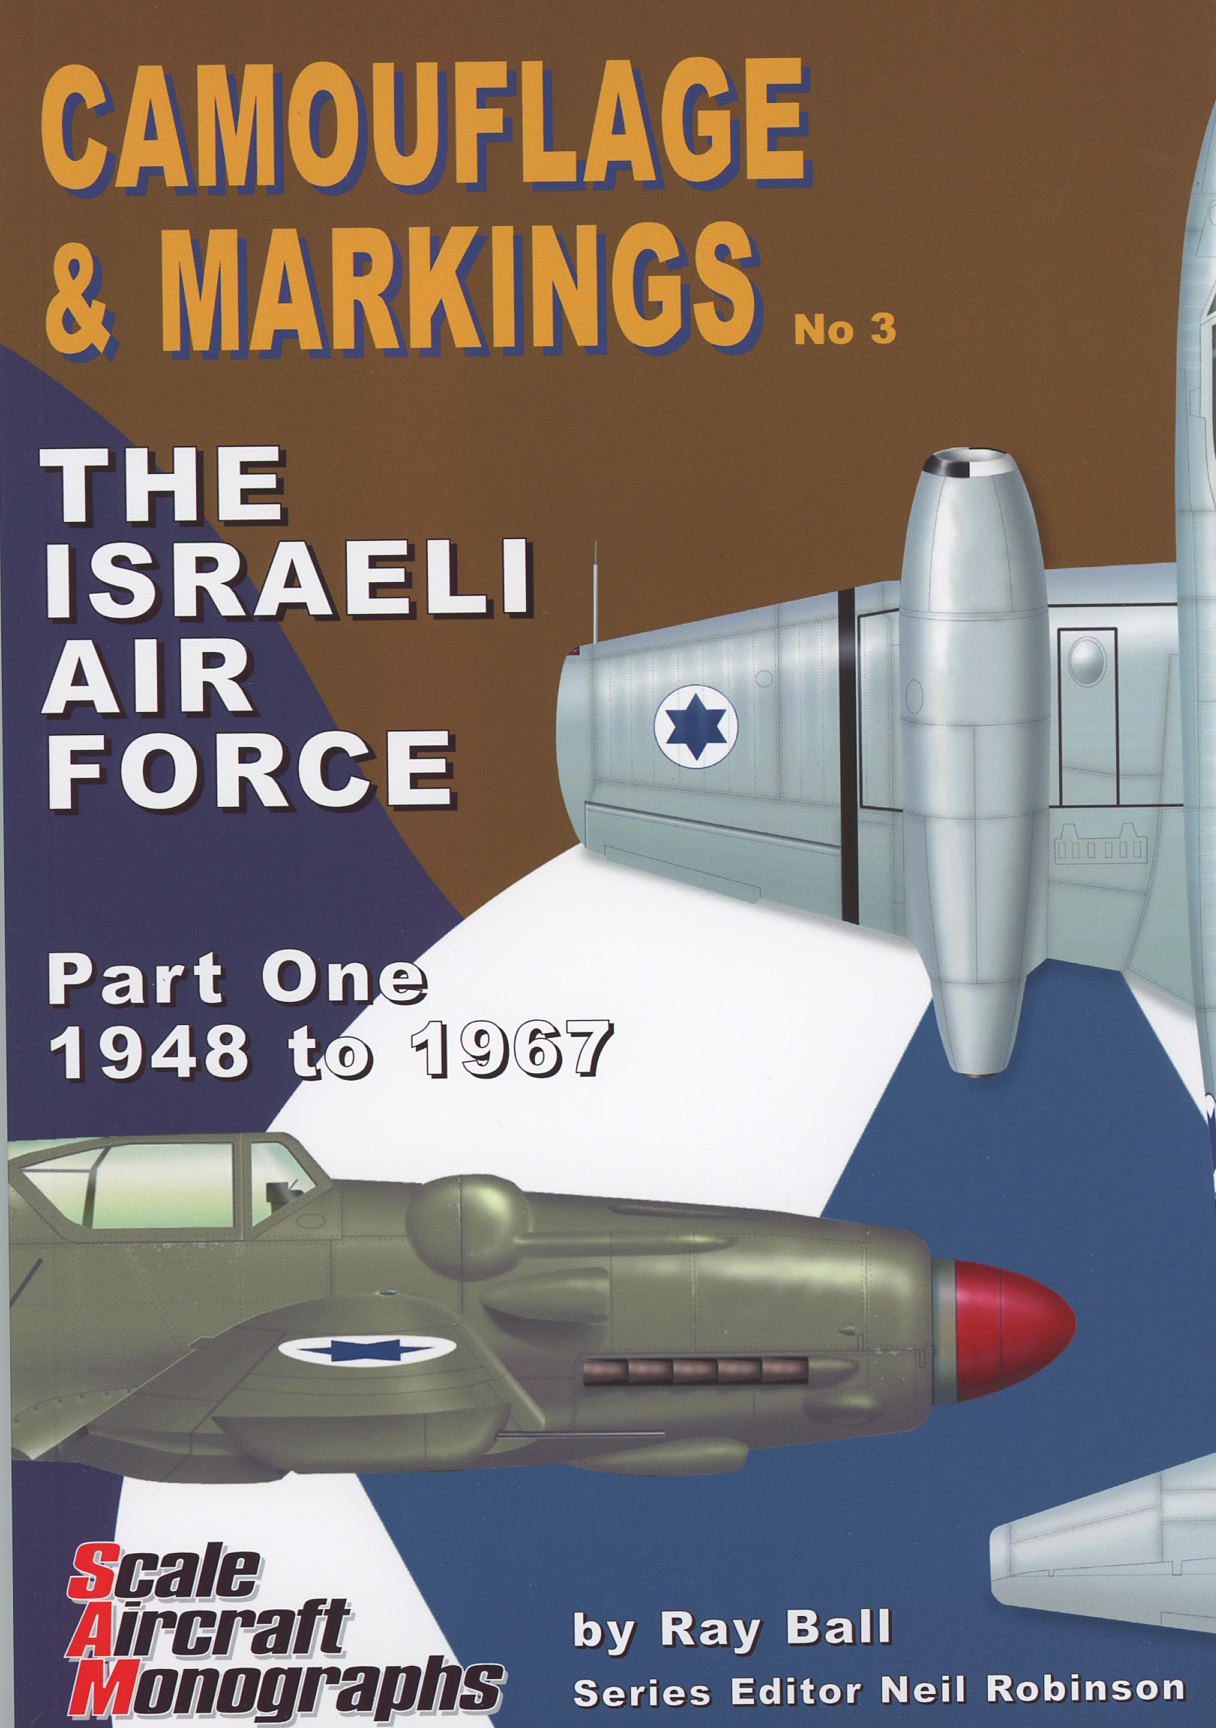 Guideline Publications Ltd Camouflage & Markings 3: The Israeli Air Force Part one 1948-1967 By Ral Ball 